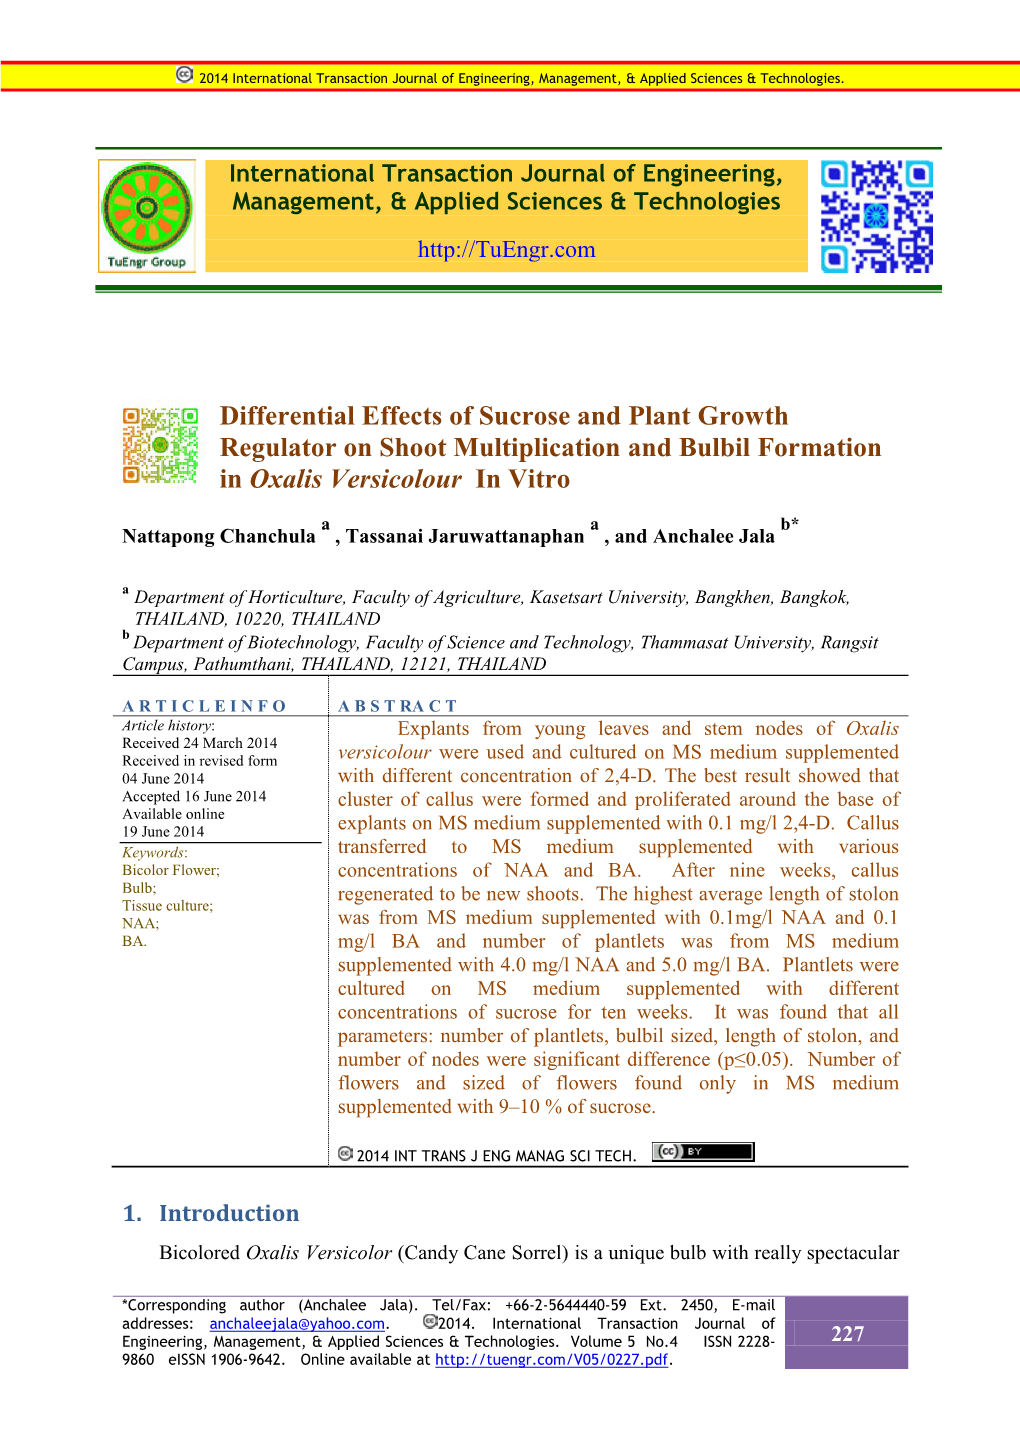 Differential Effects of Sucrose and Plant Growth Regulator on Shoot Multiplication and Bulbil Formation in Oxalis Versicolour in Vitro